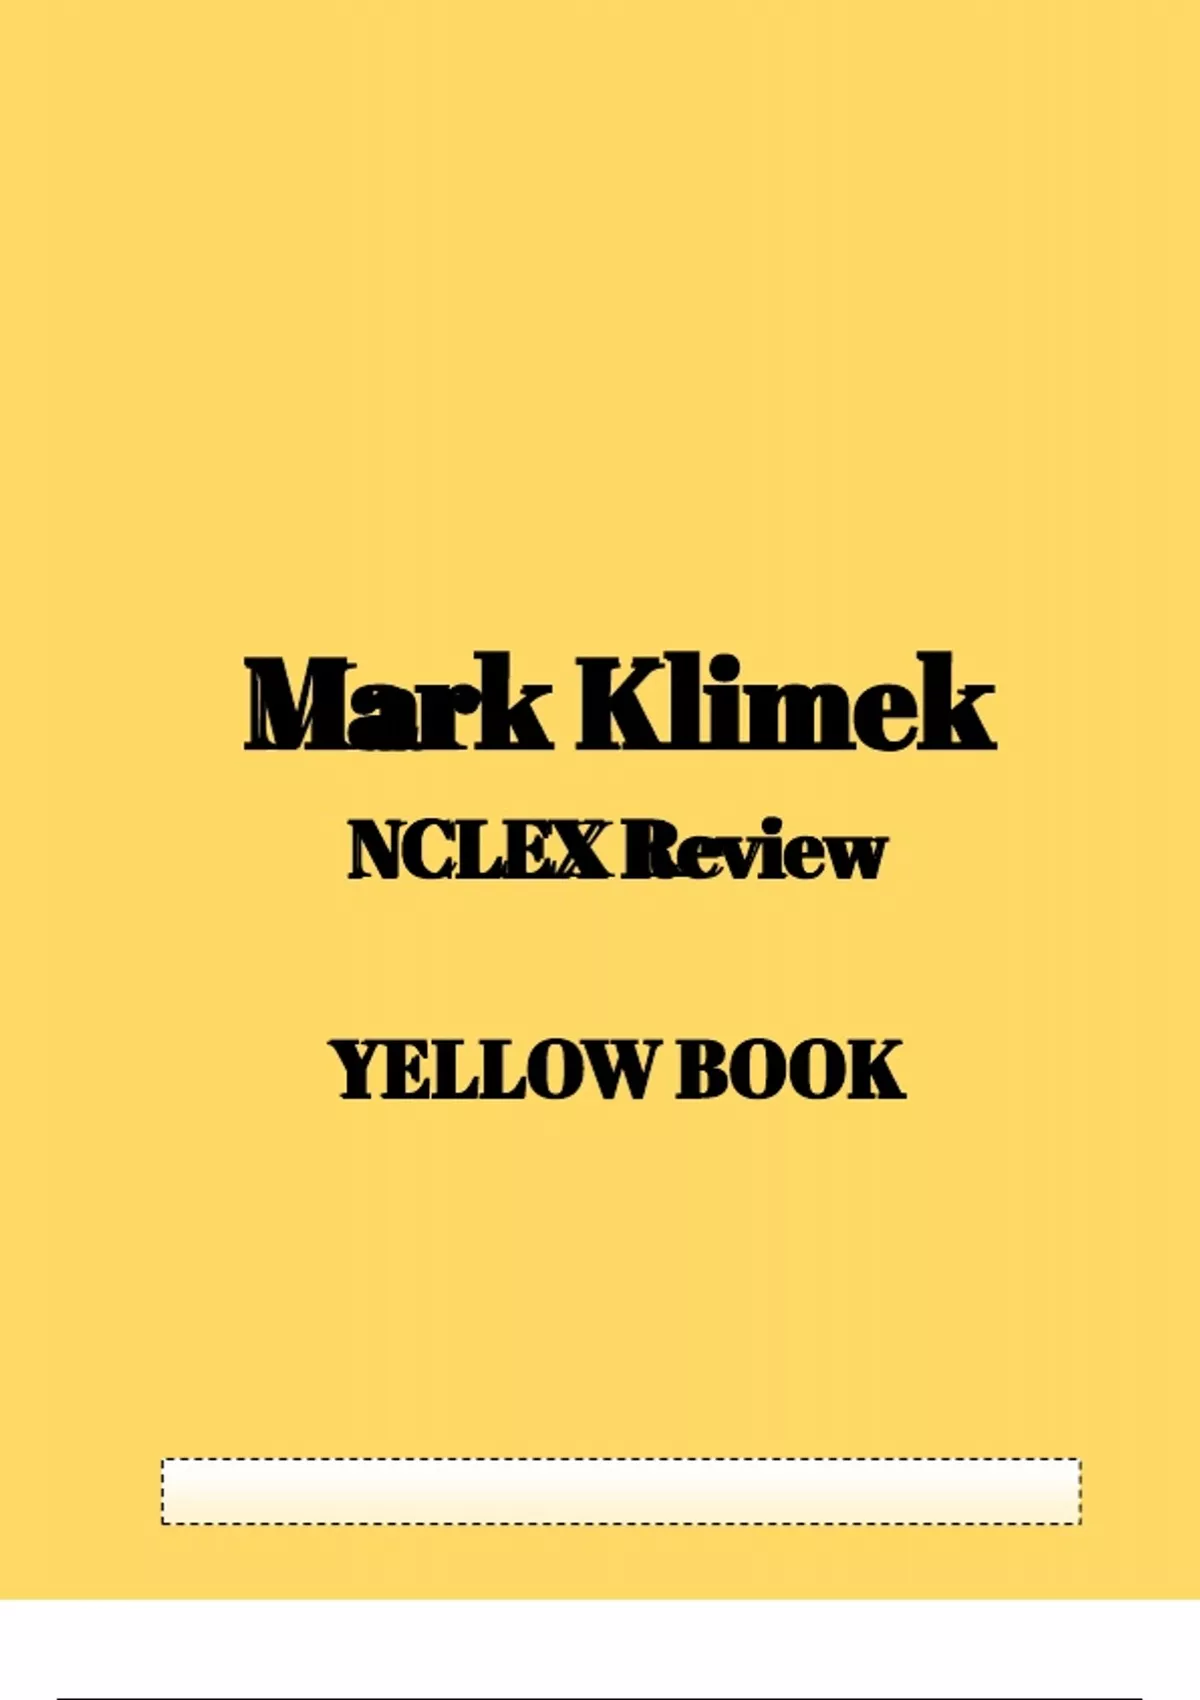 Mark Klimek NCLEX Review YELLOW BOOK questions with correct answers